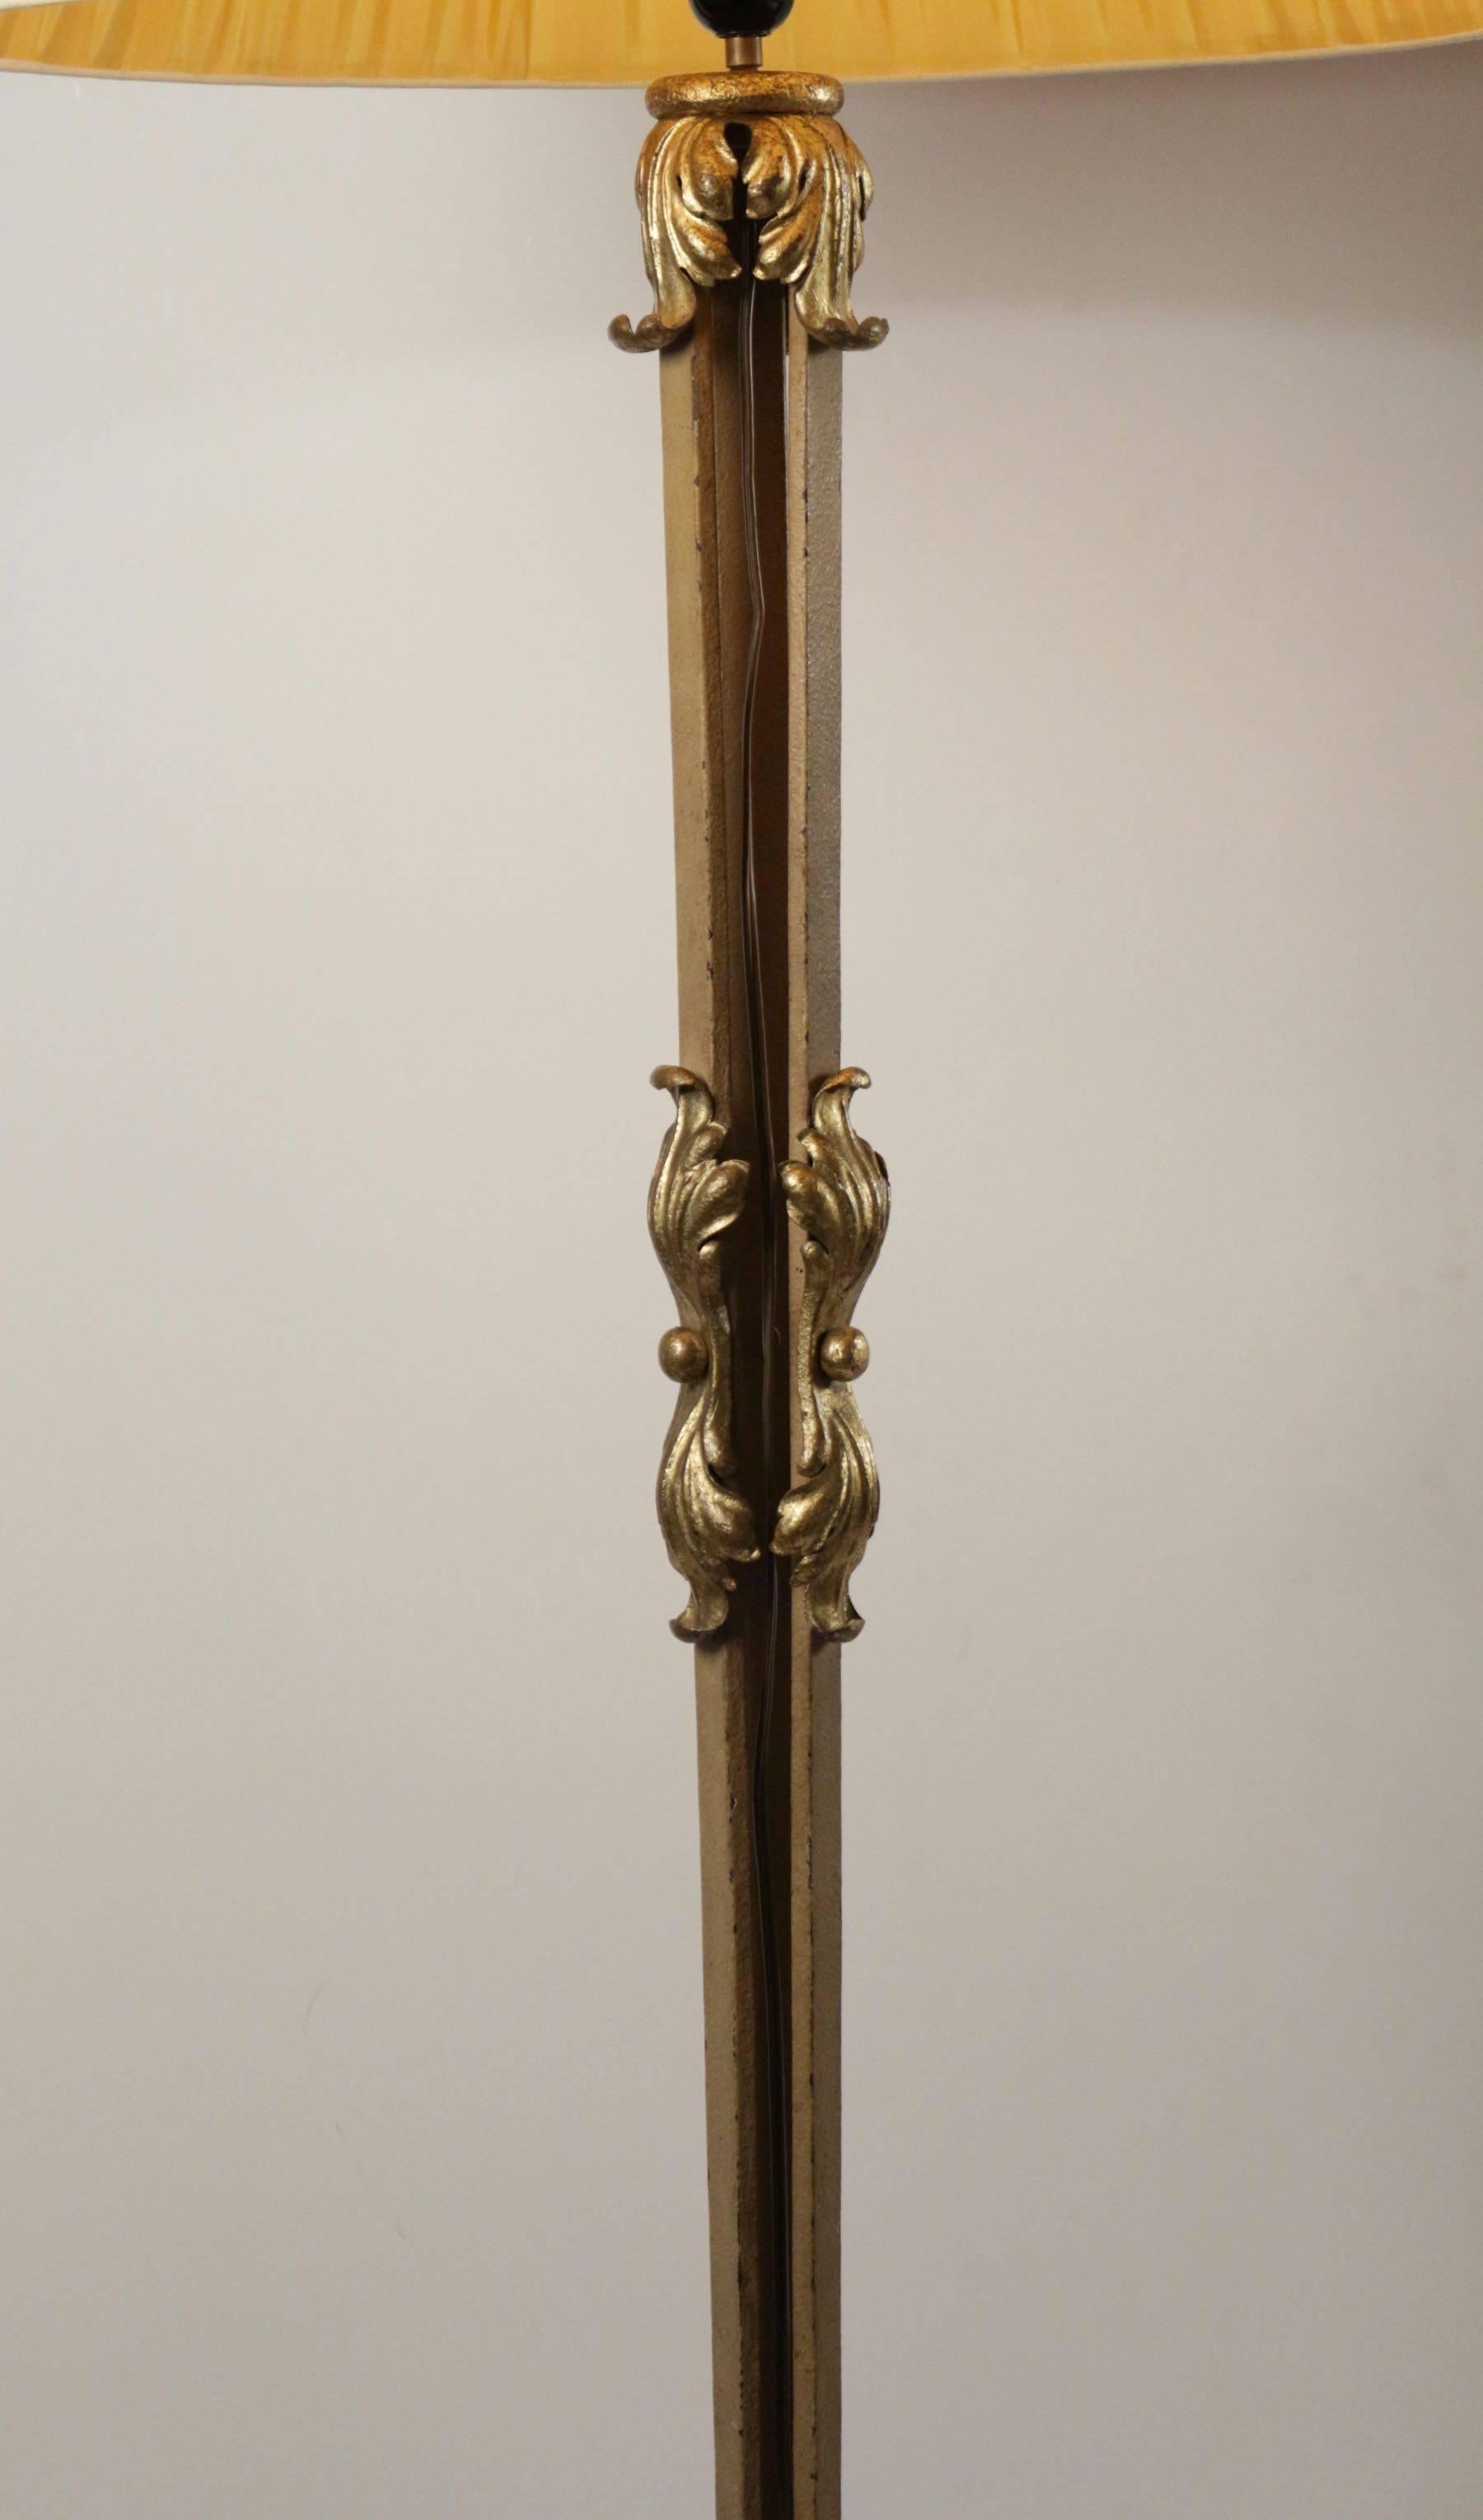 19th Century Beautiful Standing Lamp in Wrought Iron with Gold Gilded Accents